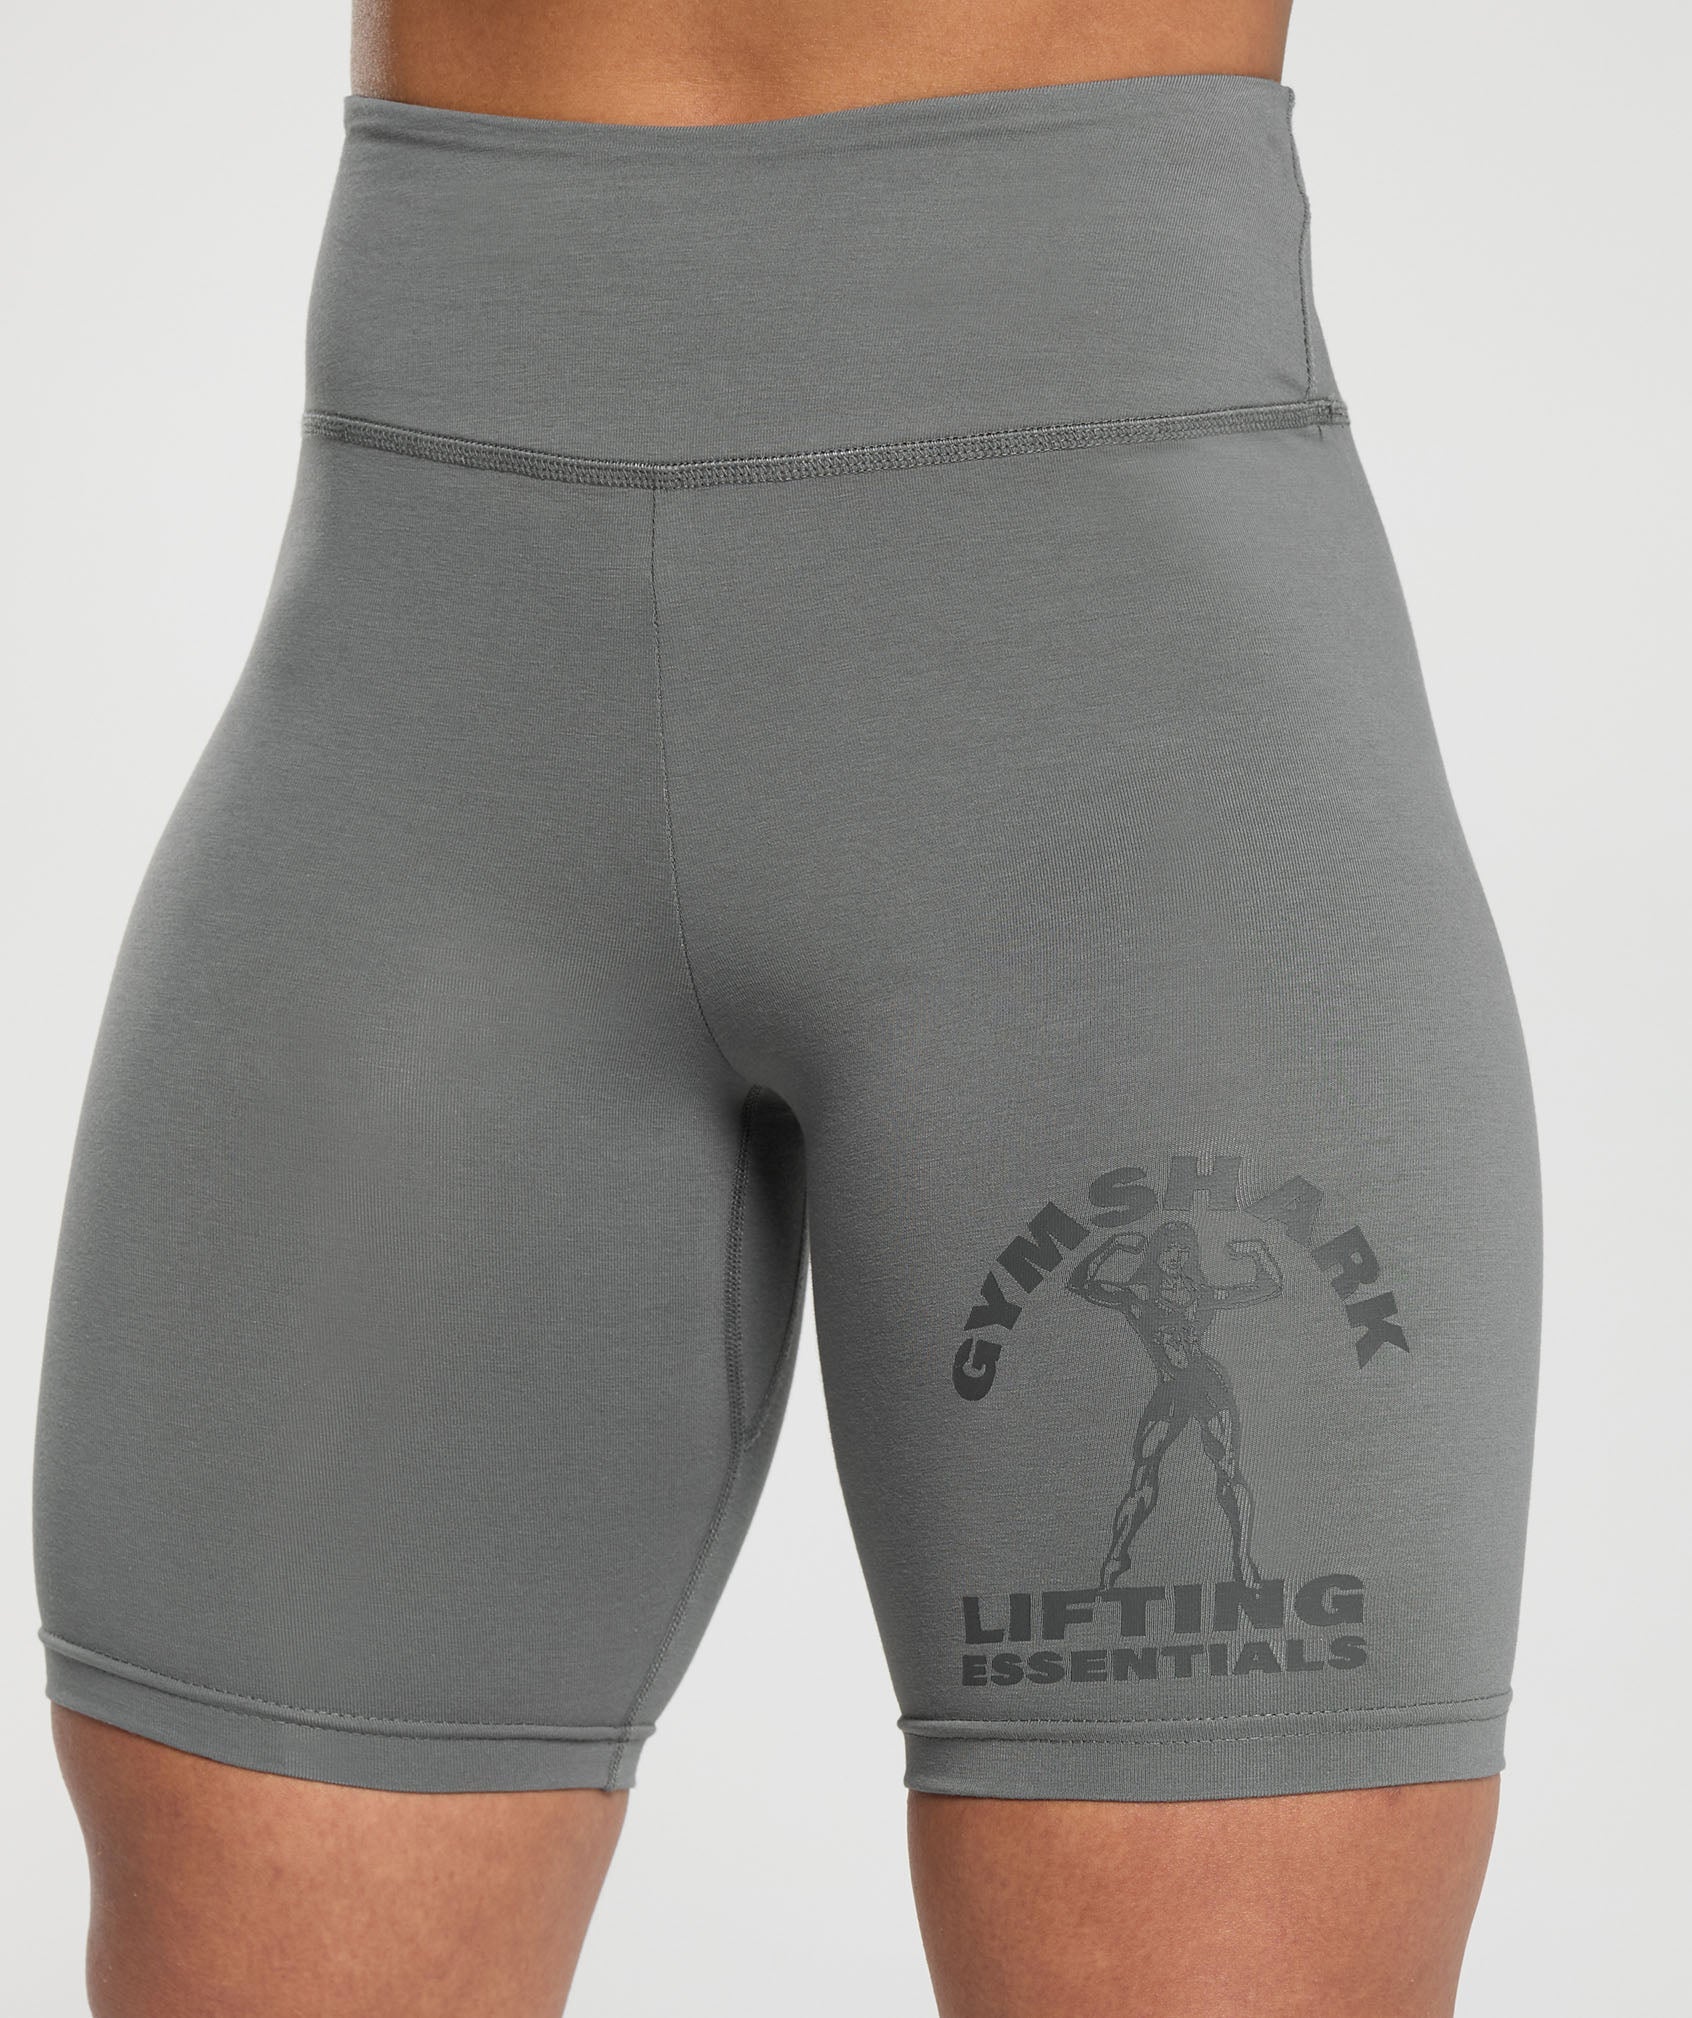 Strong Women Shorts in Brushed Grey - view 5